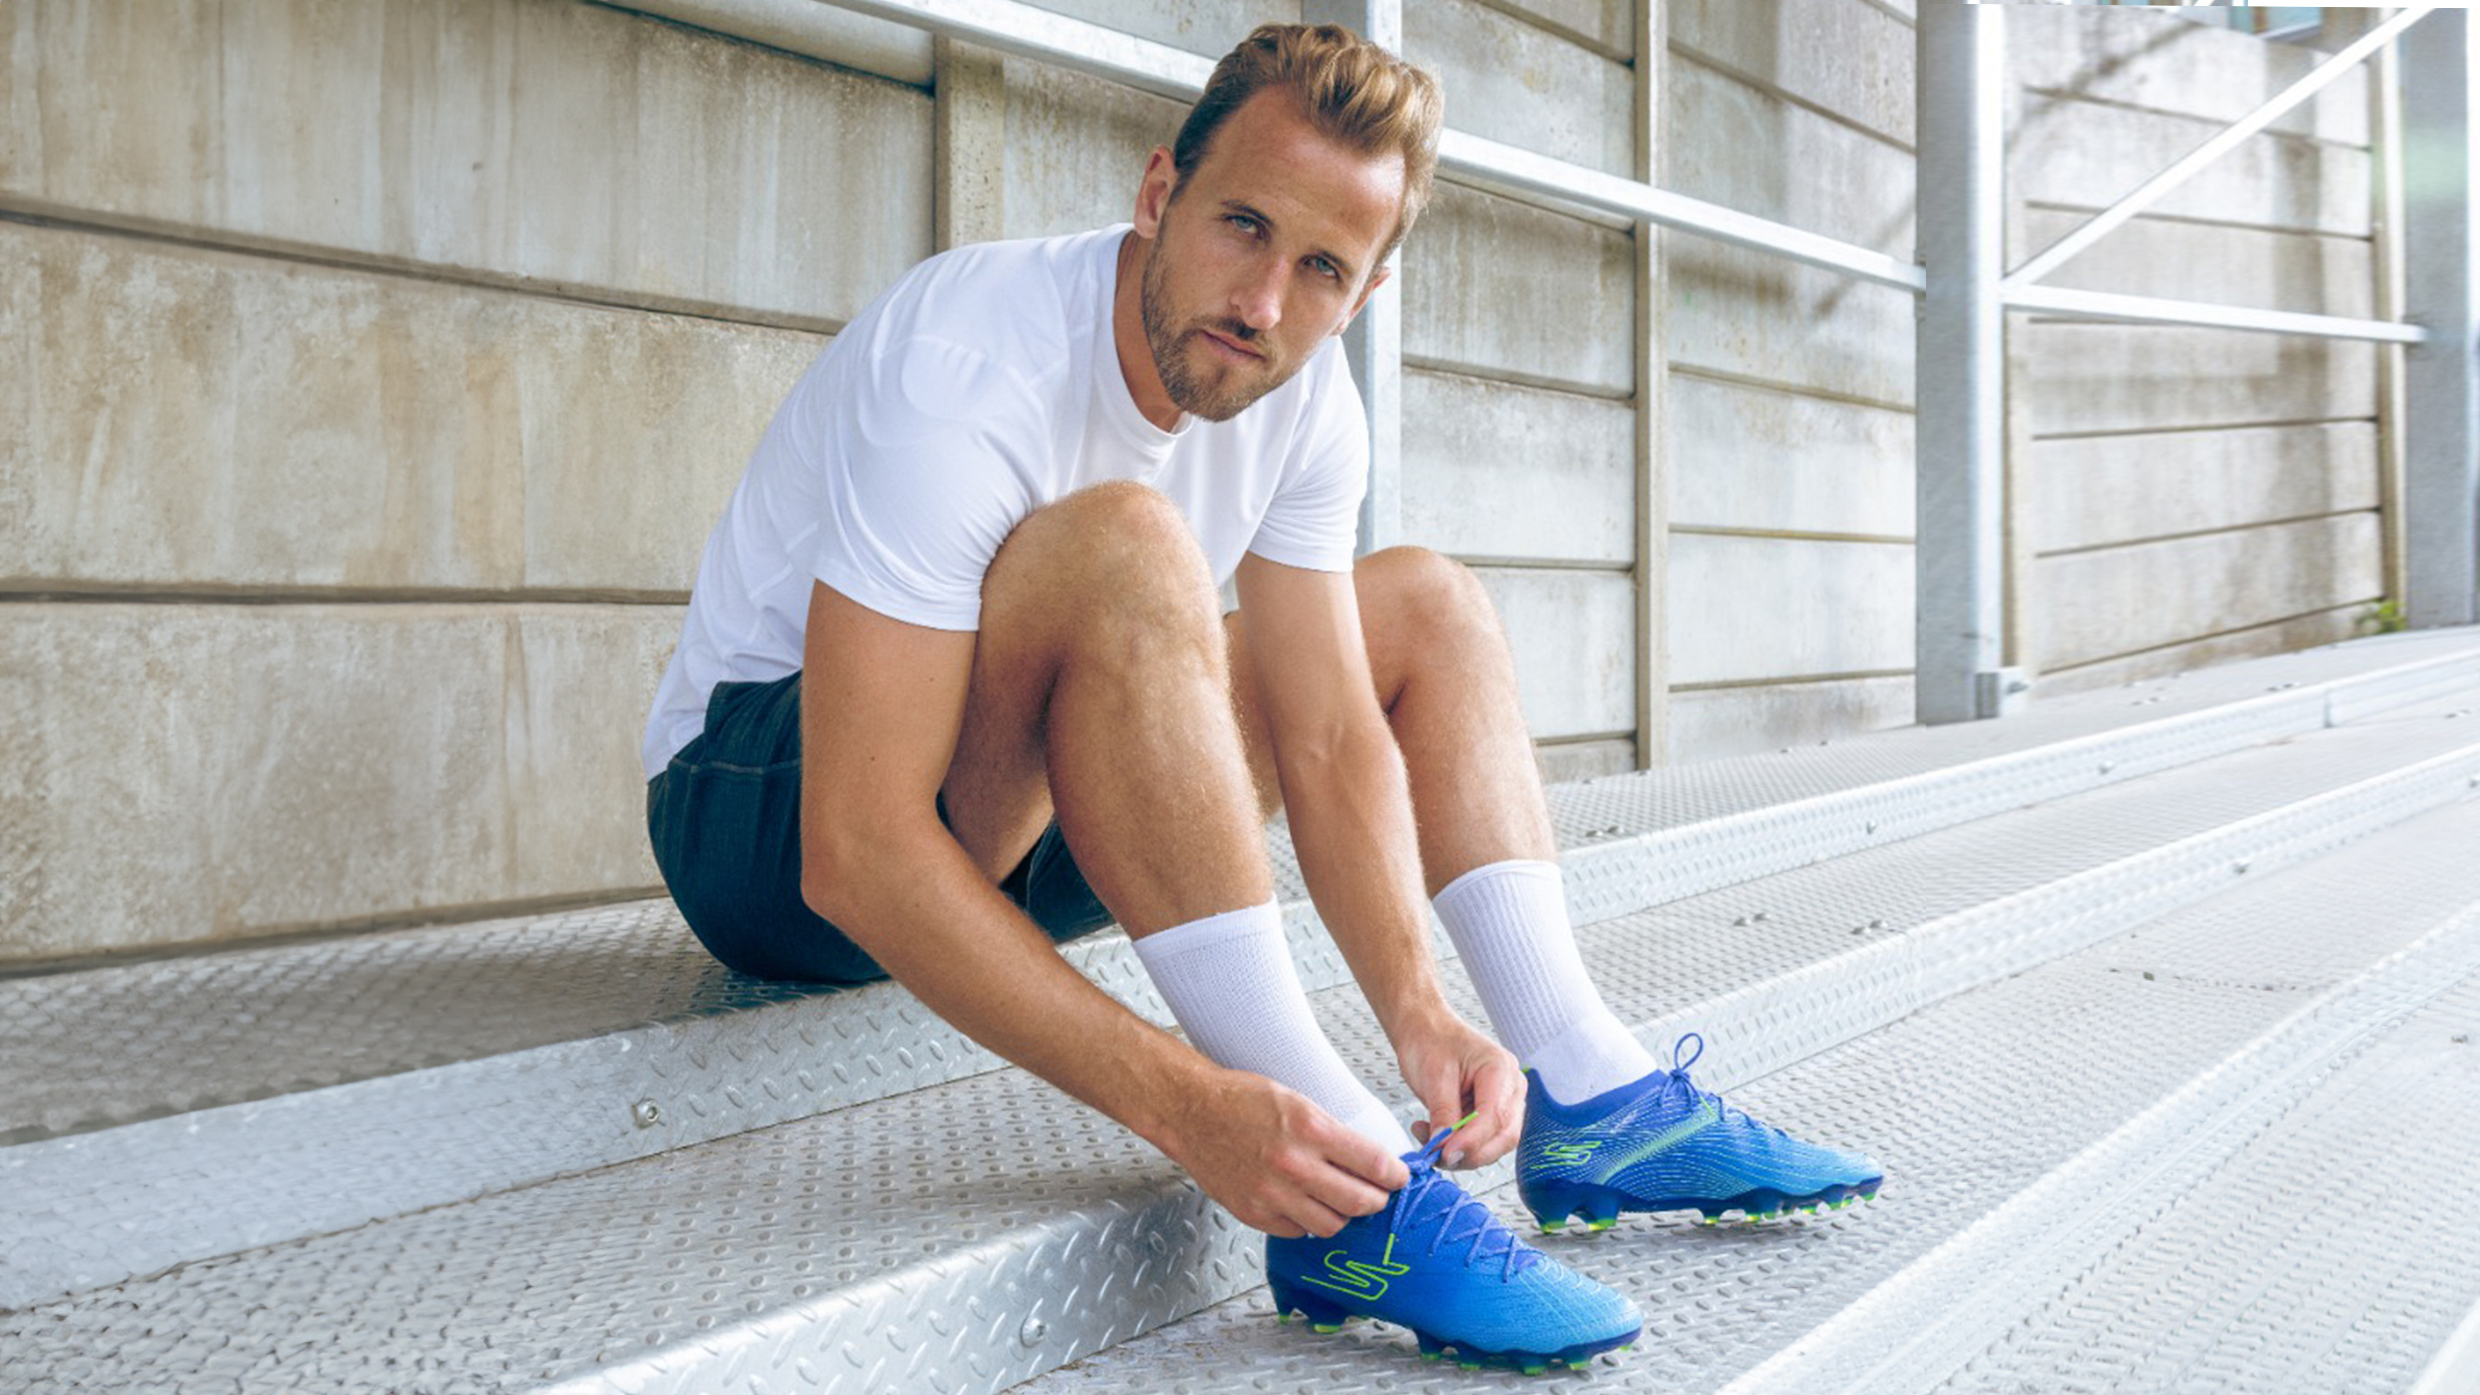 "The whole deal just just fell into place" ­­­­­­­- Harry Kane reveals how his boot partnership with Skechers came about